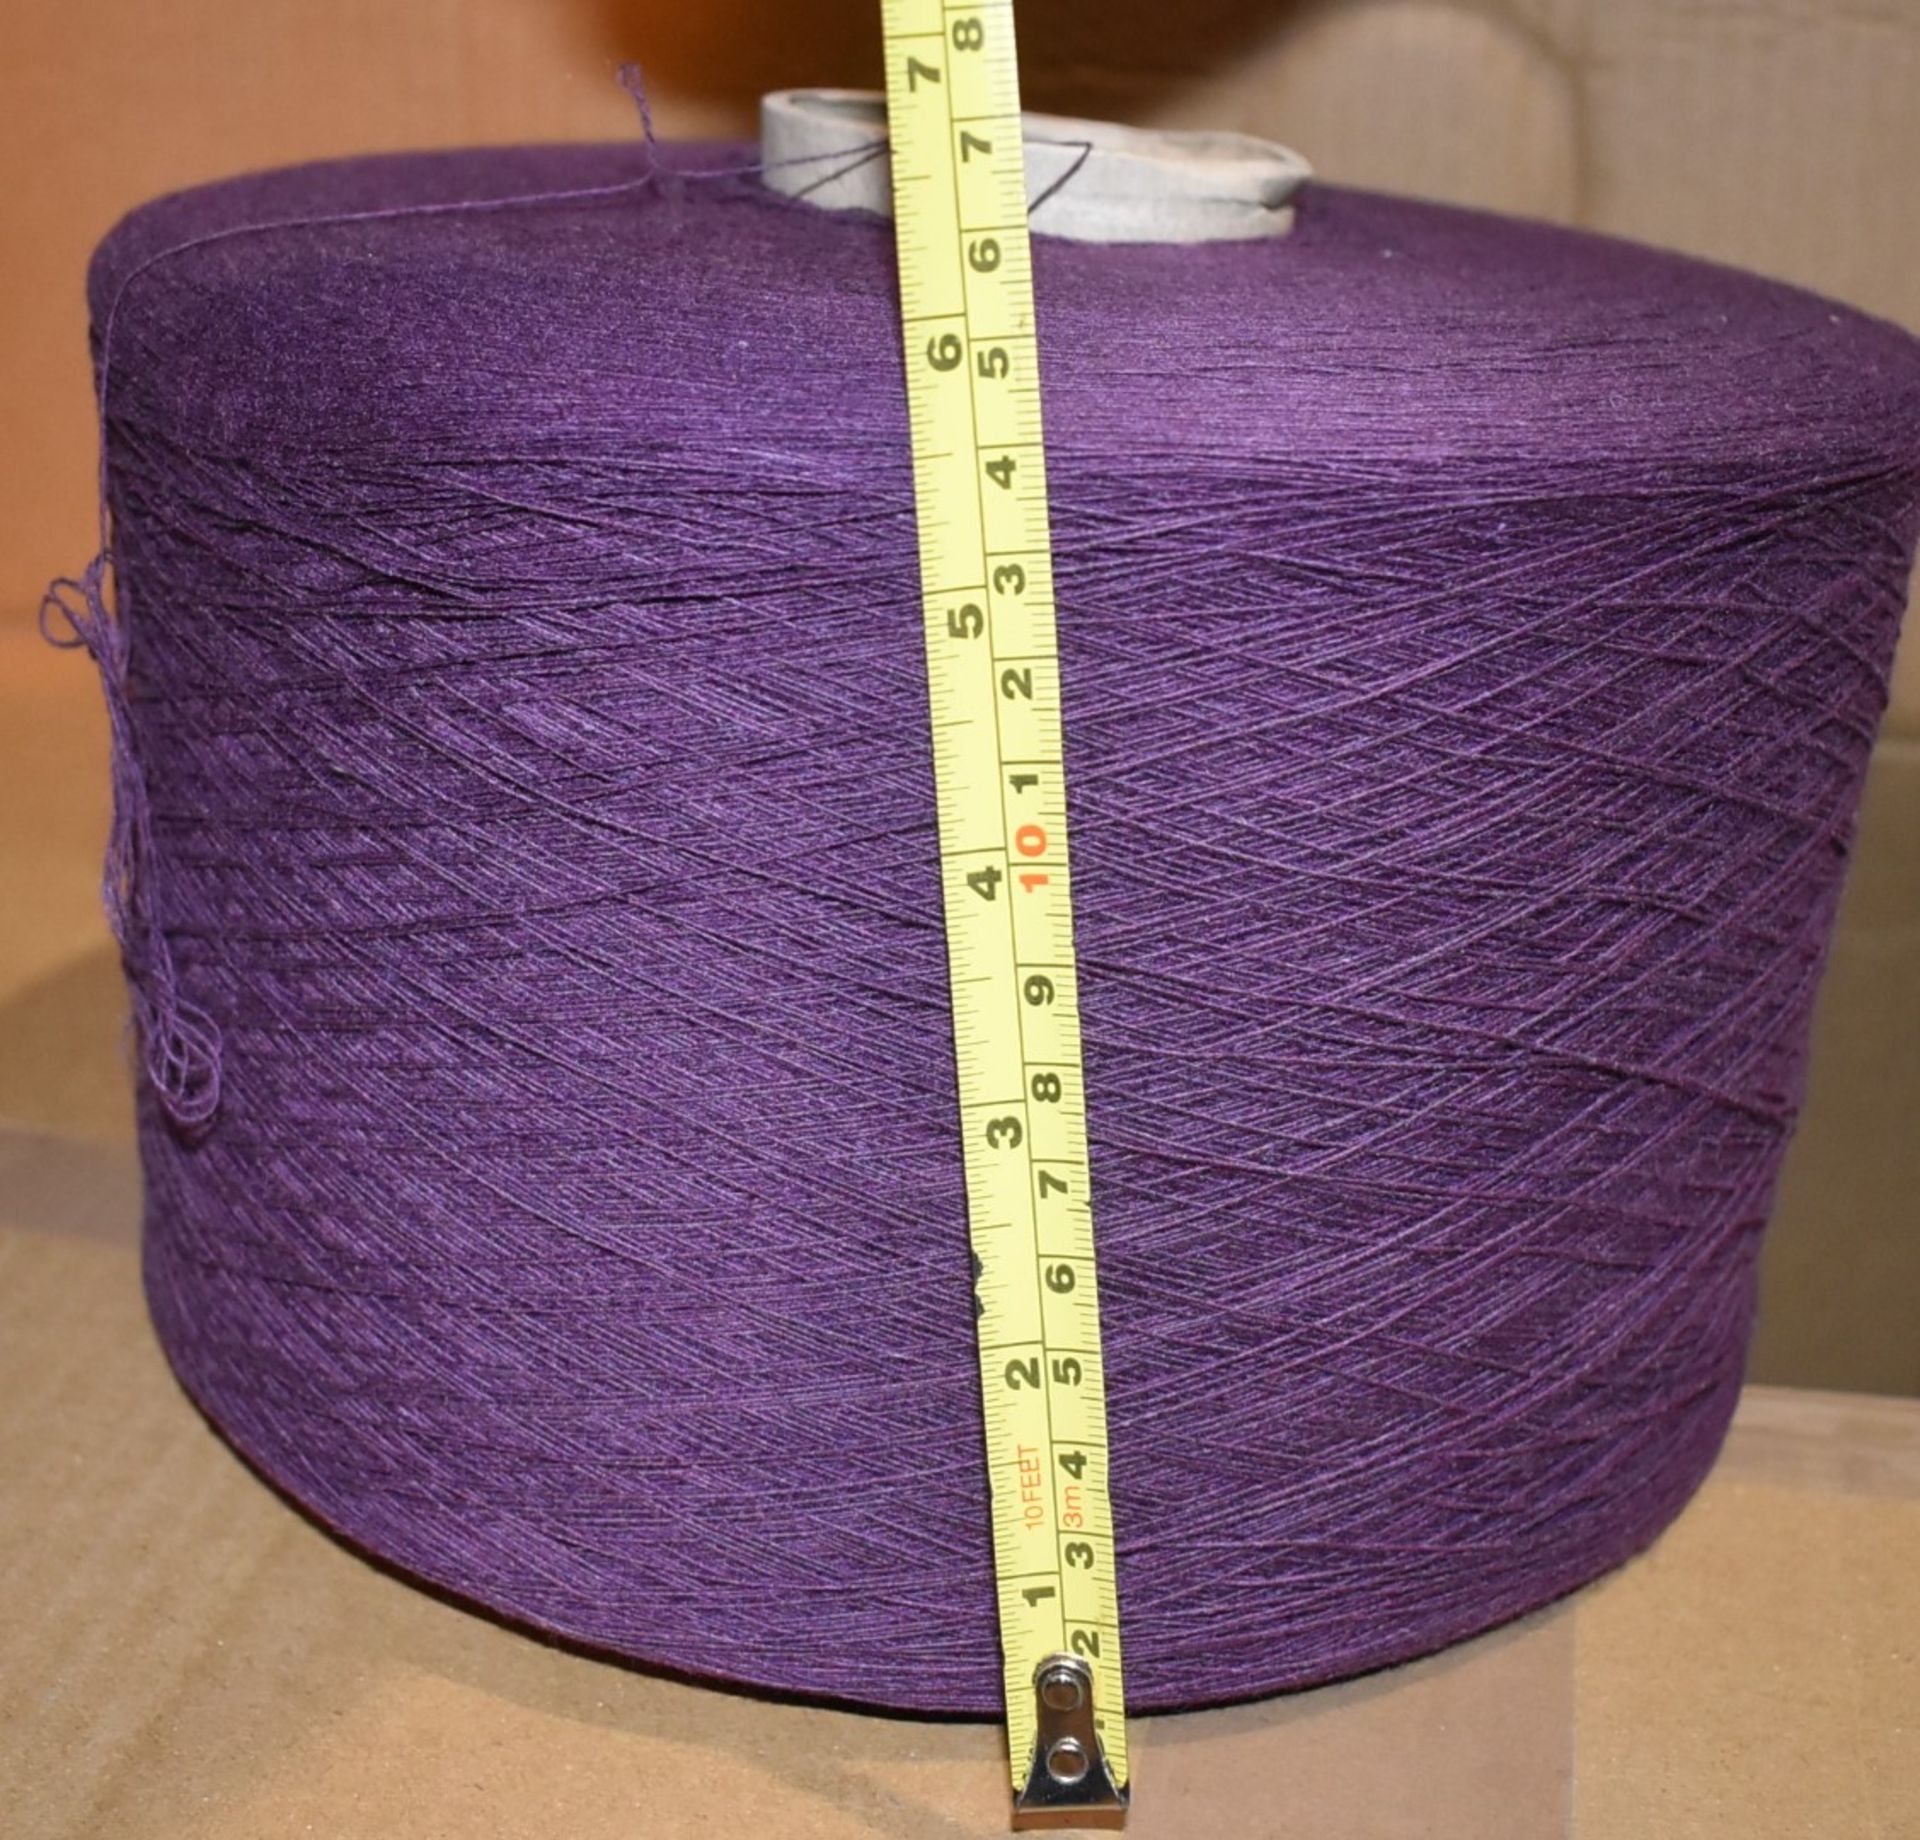 1 x Cone of 1/13 MicroCotton Knitting Yarn - Purple - Approx Weight: 2,300g - New Stock ABL Yarn - Image 8 of 9